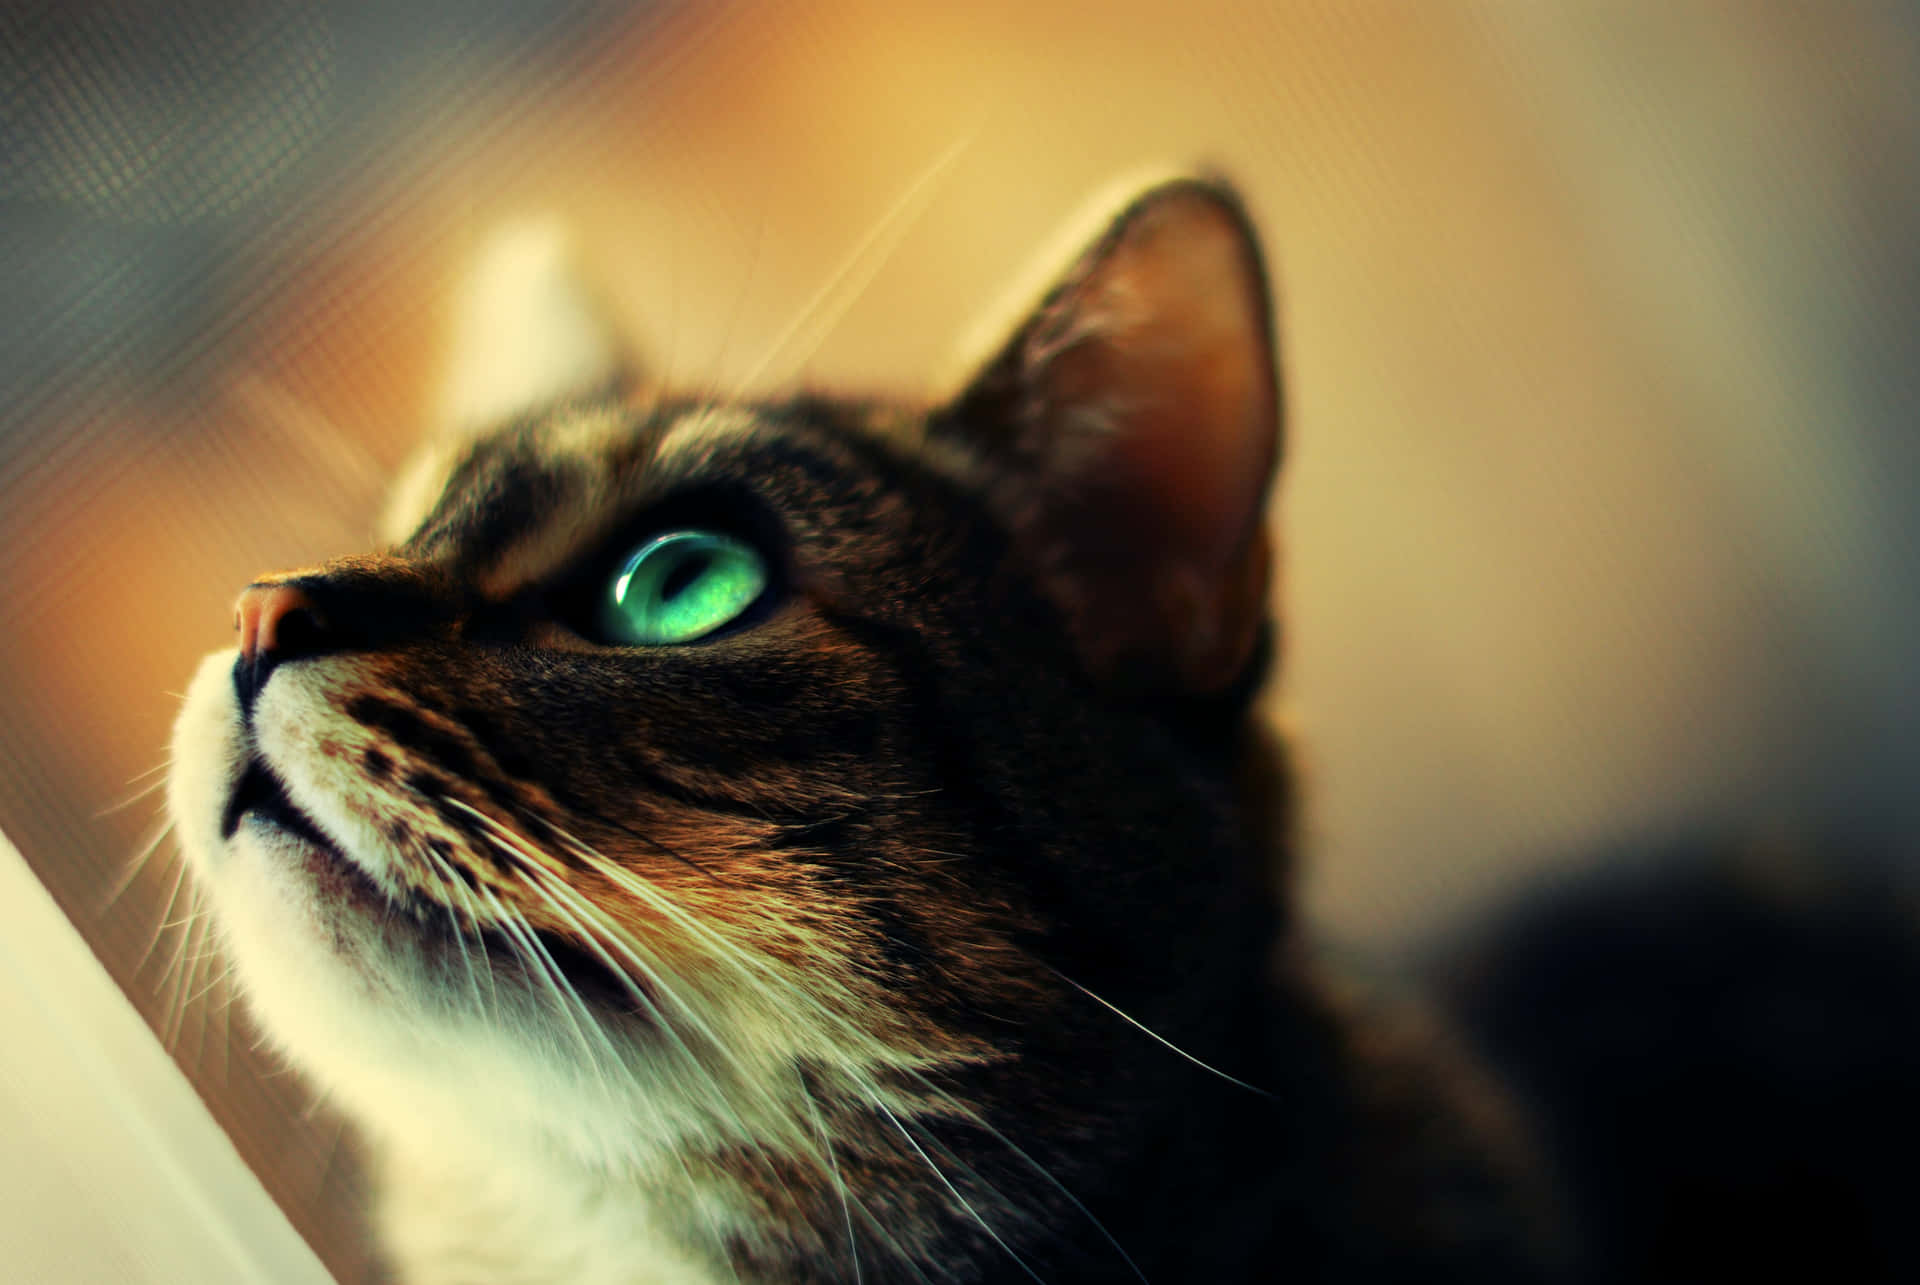 Stunning close-up of a Tabby Cat with bright green eyes and beautiful striped fur Wallpaper